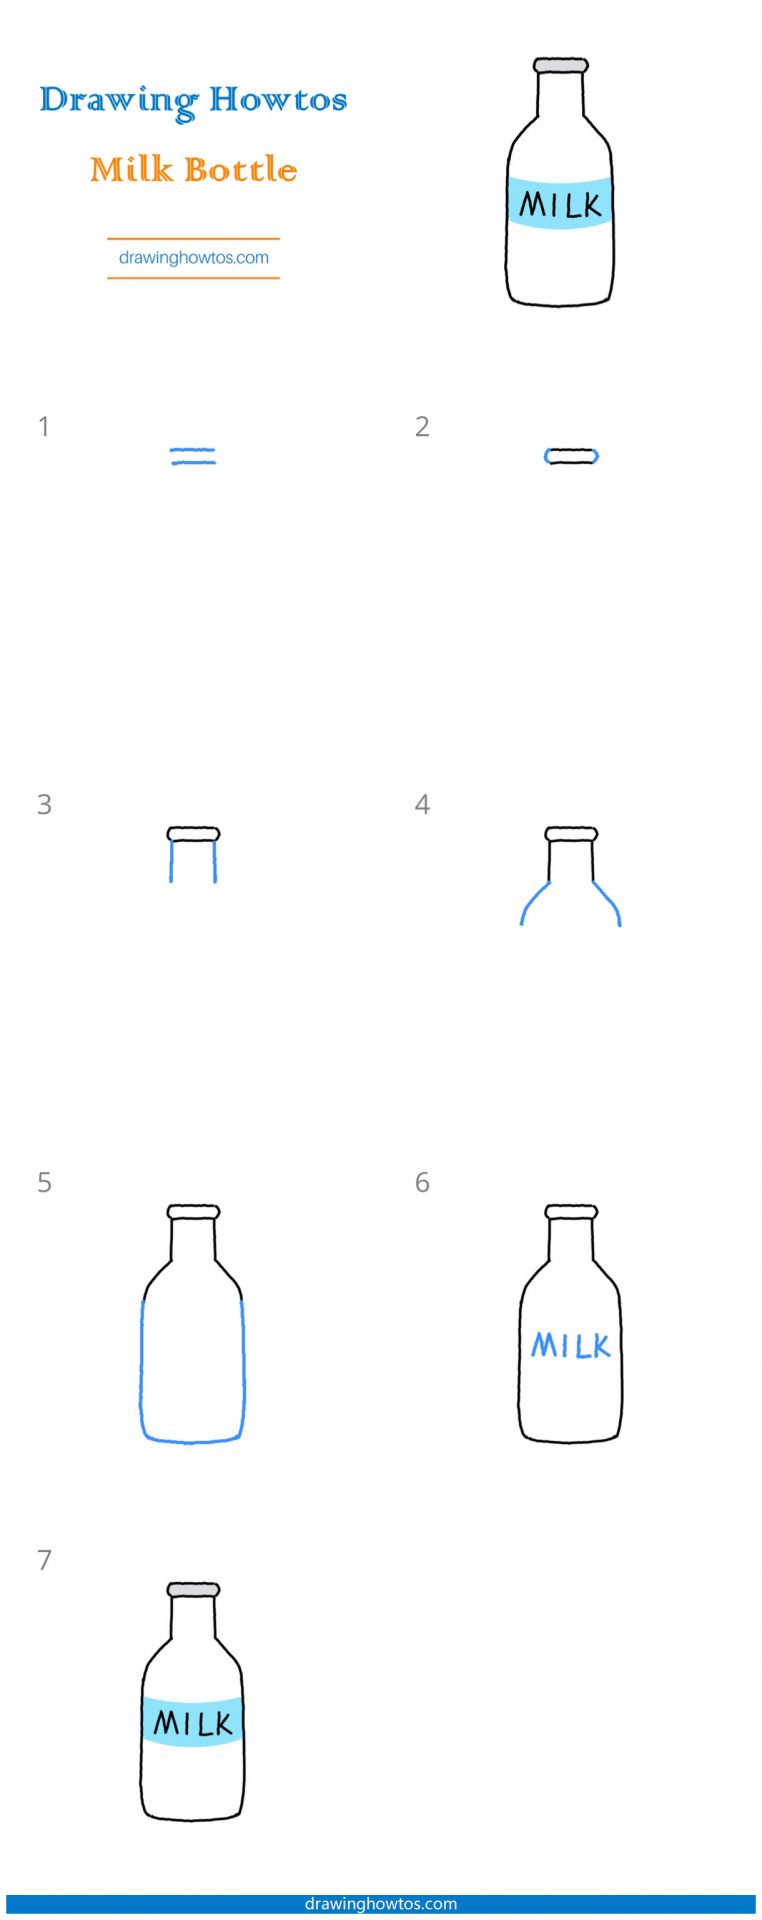 How to Draw a Milk Bottle Step by Step